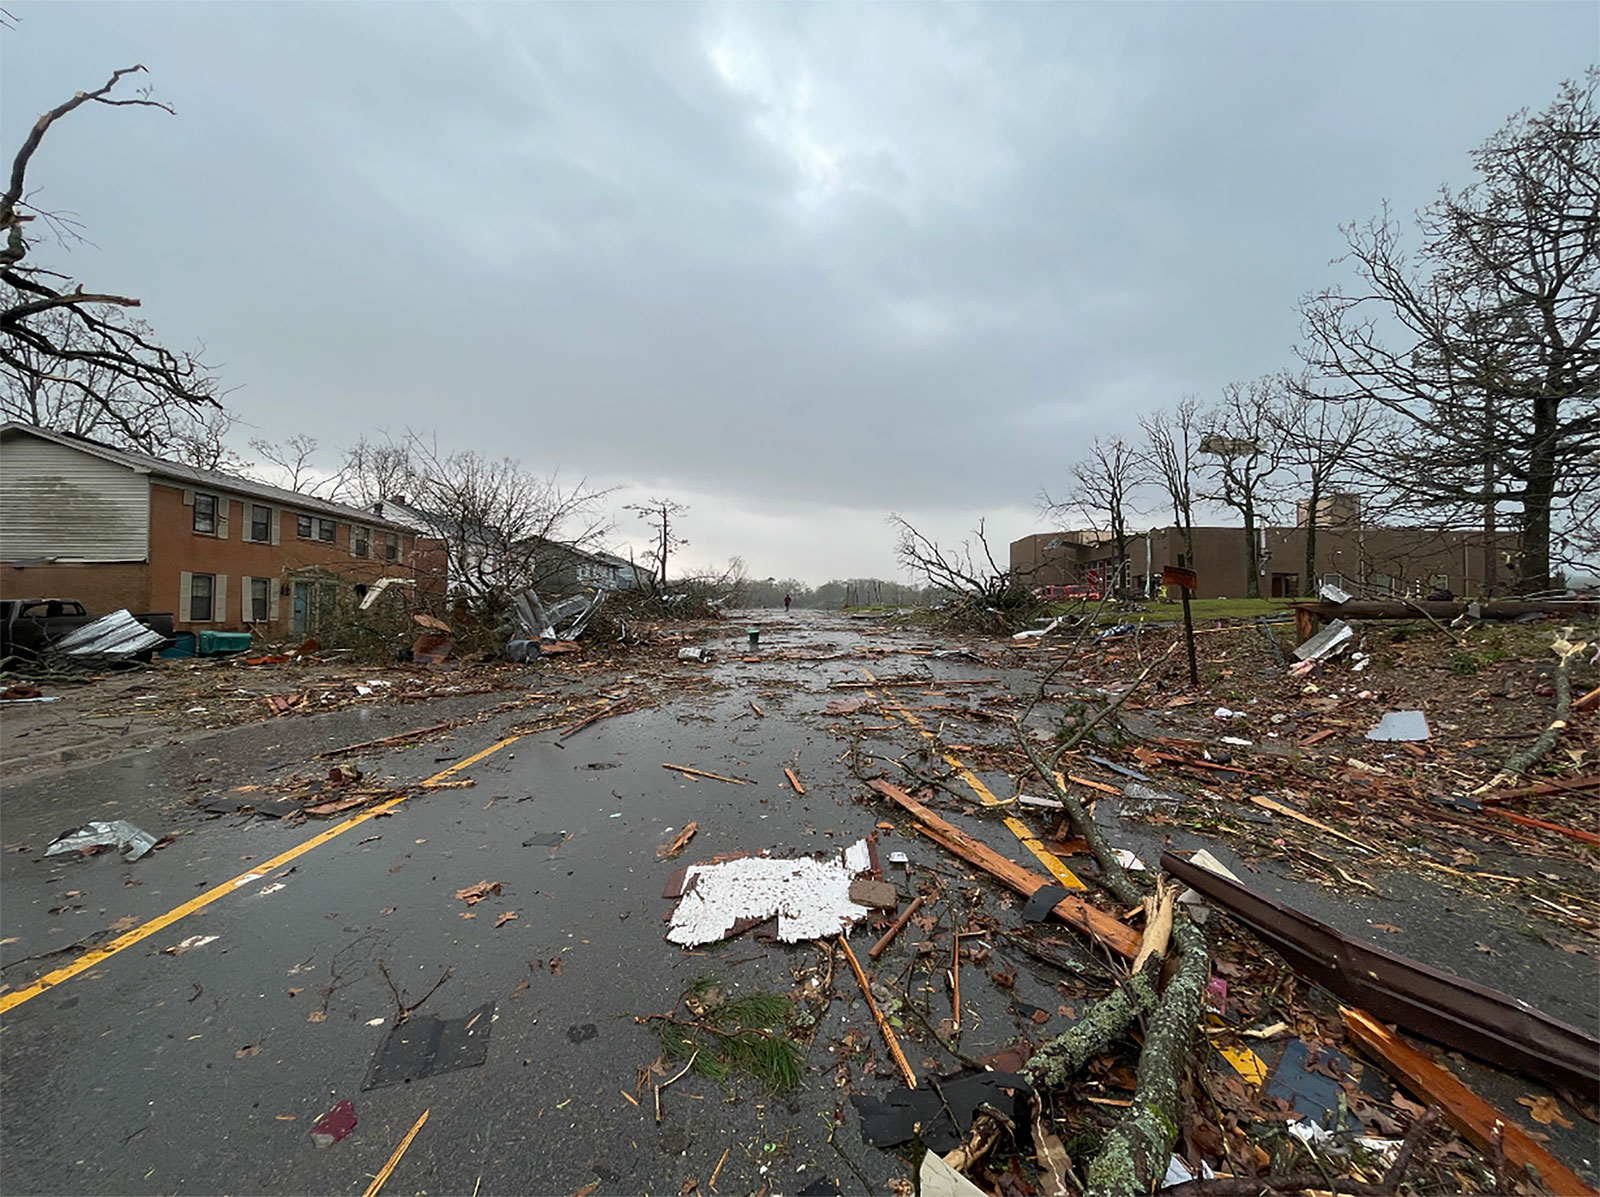 Storm damage is seen in Little Rock on Friday.